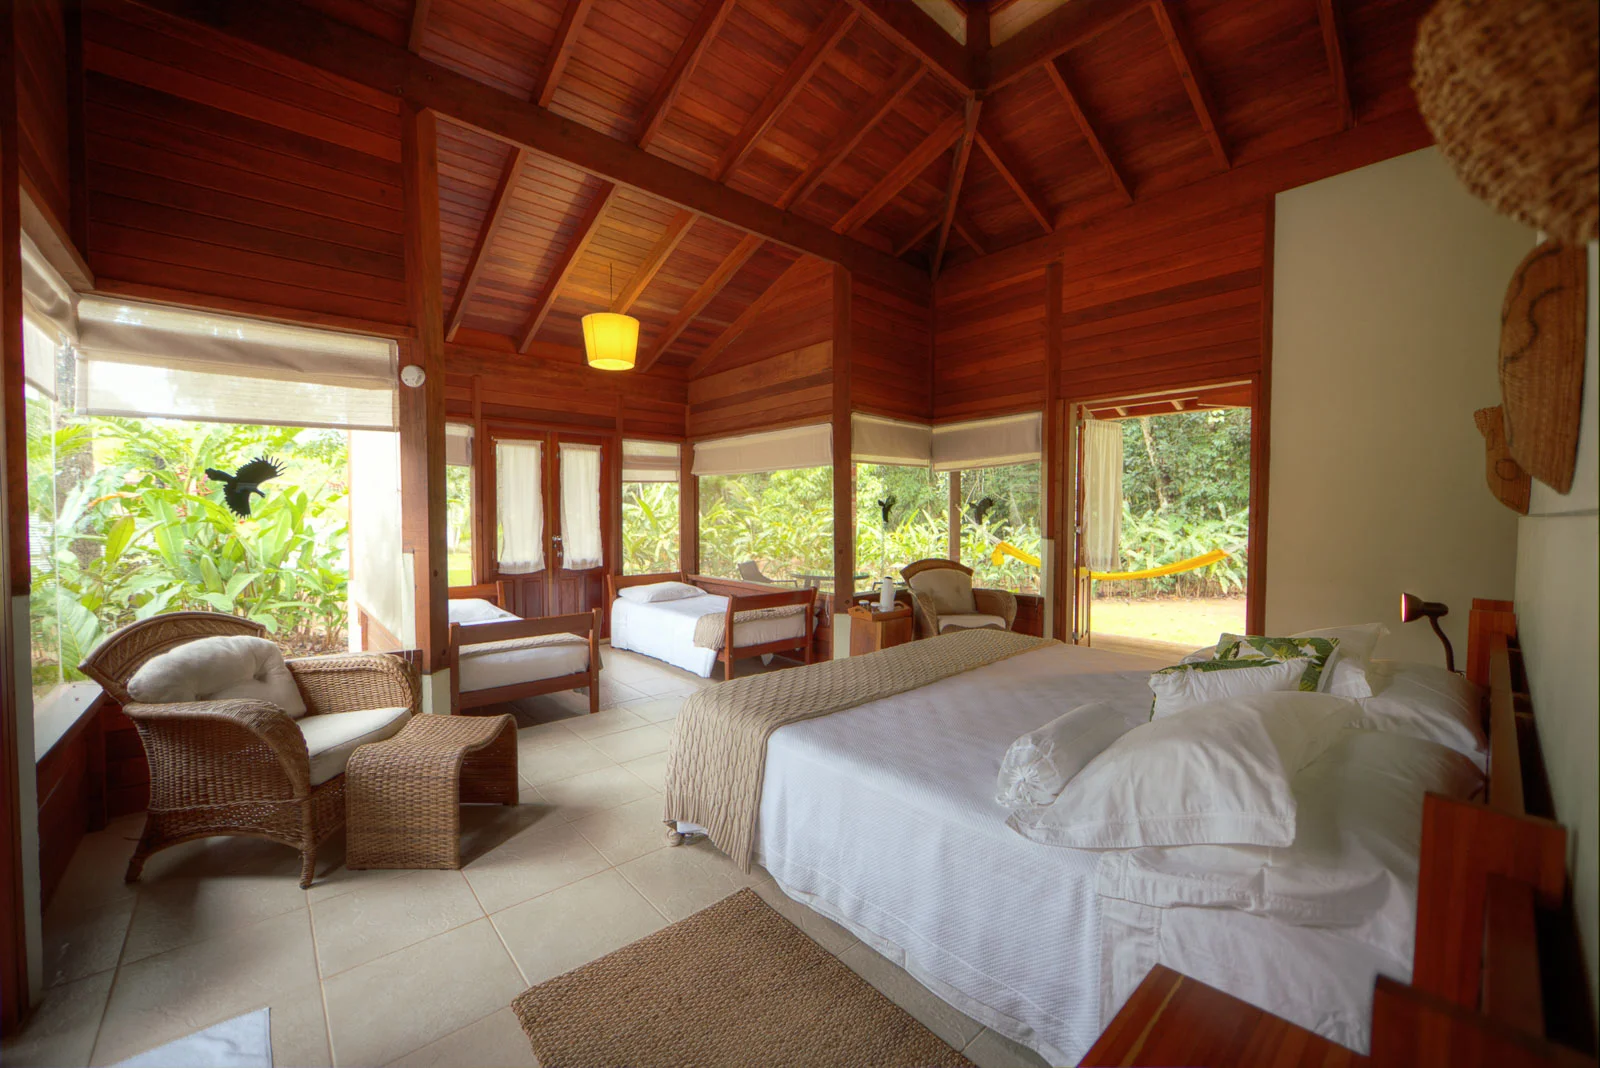 interior shot of a bungalow at Cristalino Lodge, showing a king size bed and two twin day beds